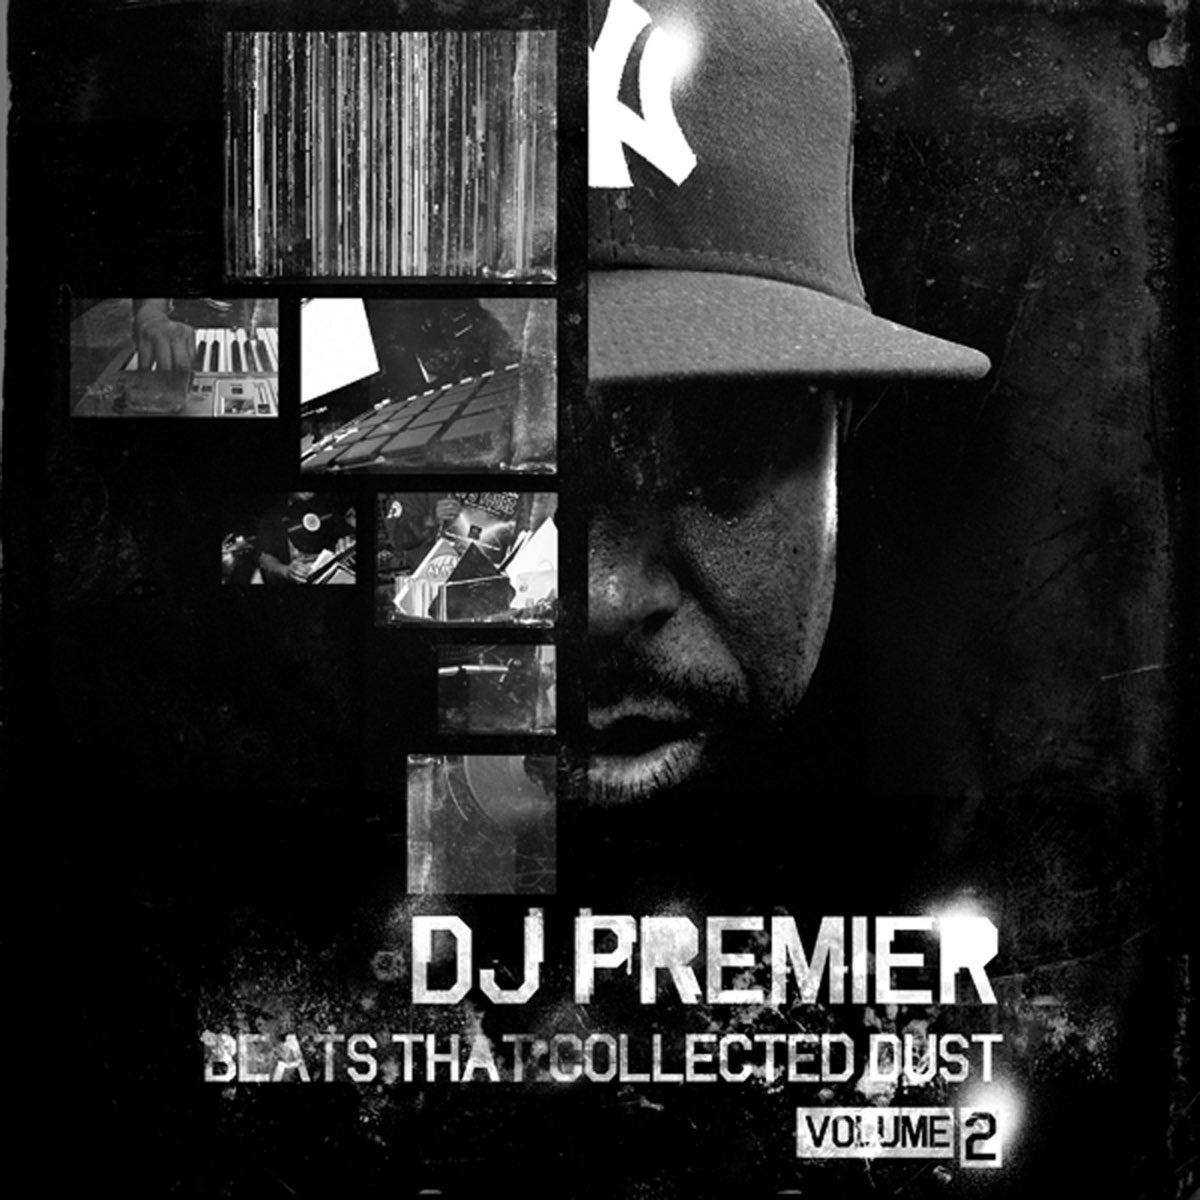 Beats That Collected Dust, Vol. 2 by DJ Premier on Apple Music